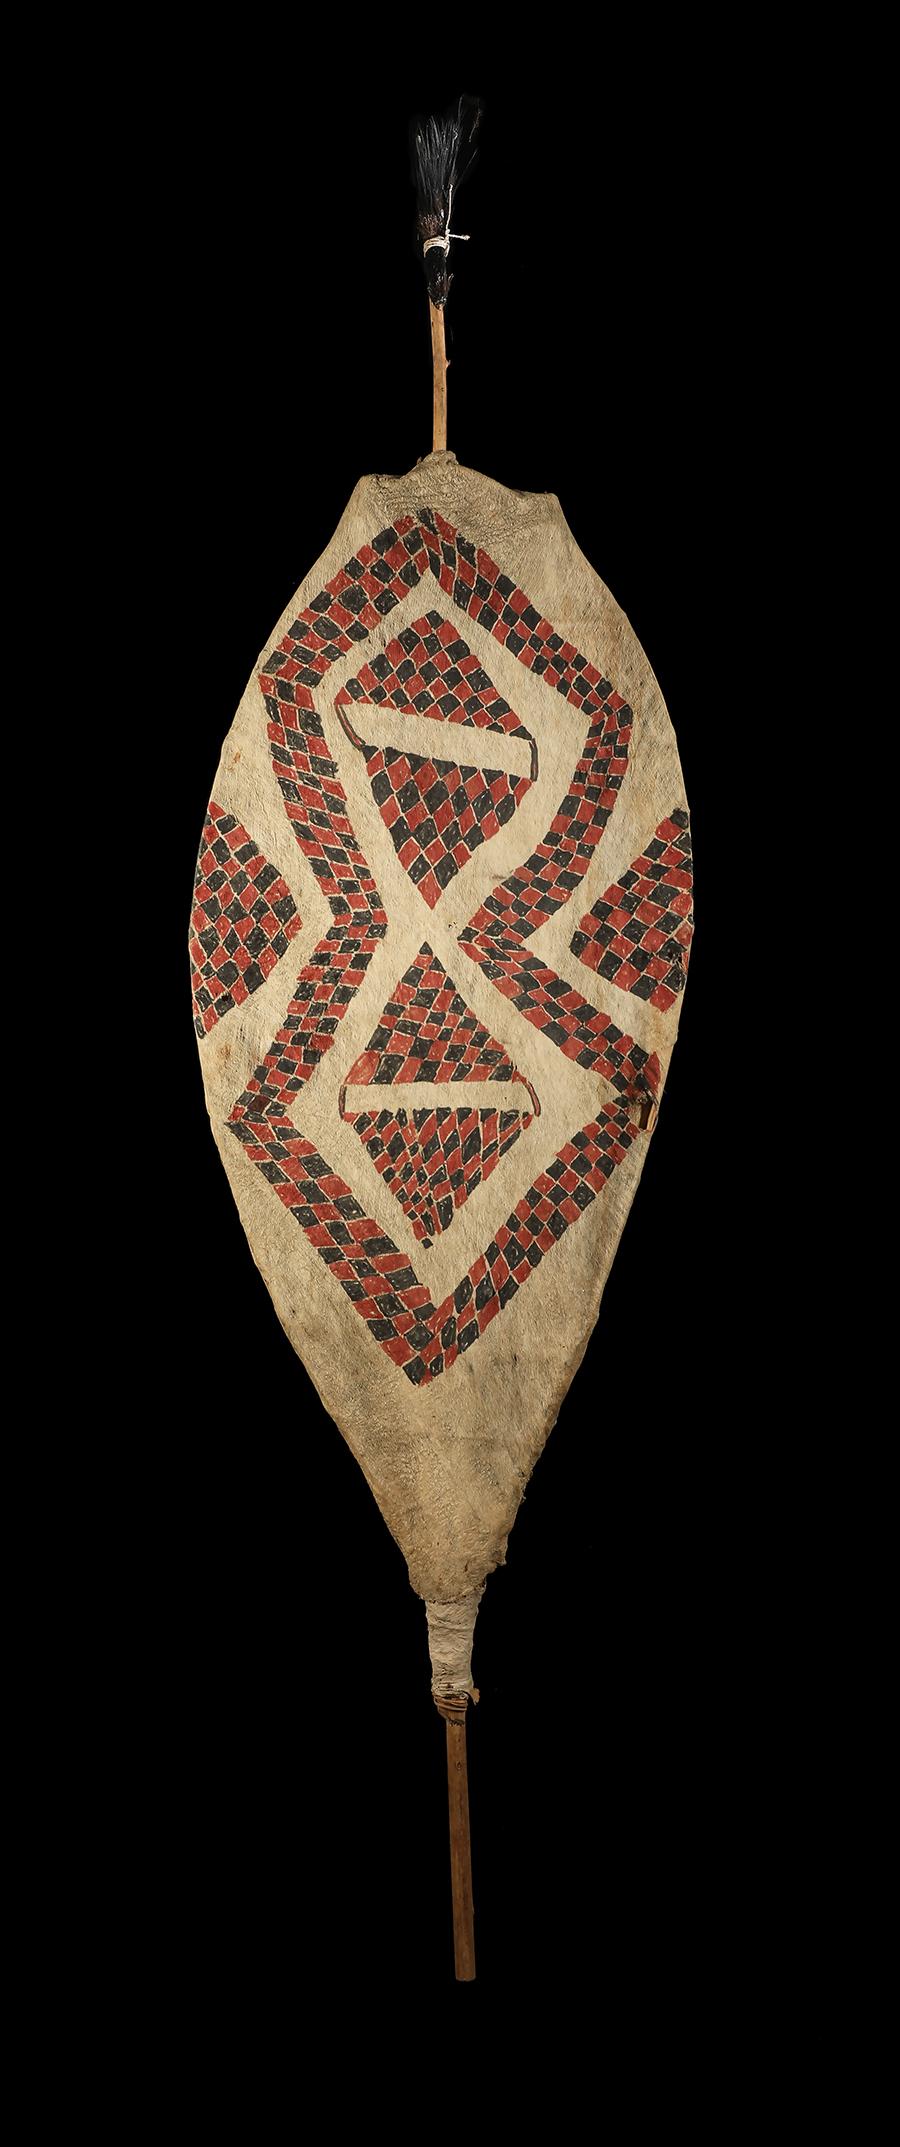 Tapa dance shield.
Baining People, New Britain, Papua New Guinea.
First half, 20th century
Pounded mulberry bark painted with natural pigments
Measures: 7 1/2 feet high (approx) x 26 ins wide (225 x 65 cm).

Provenance: Loed von Bussel,